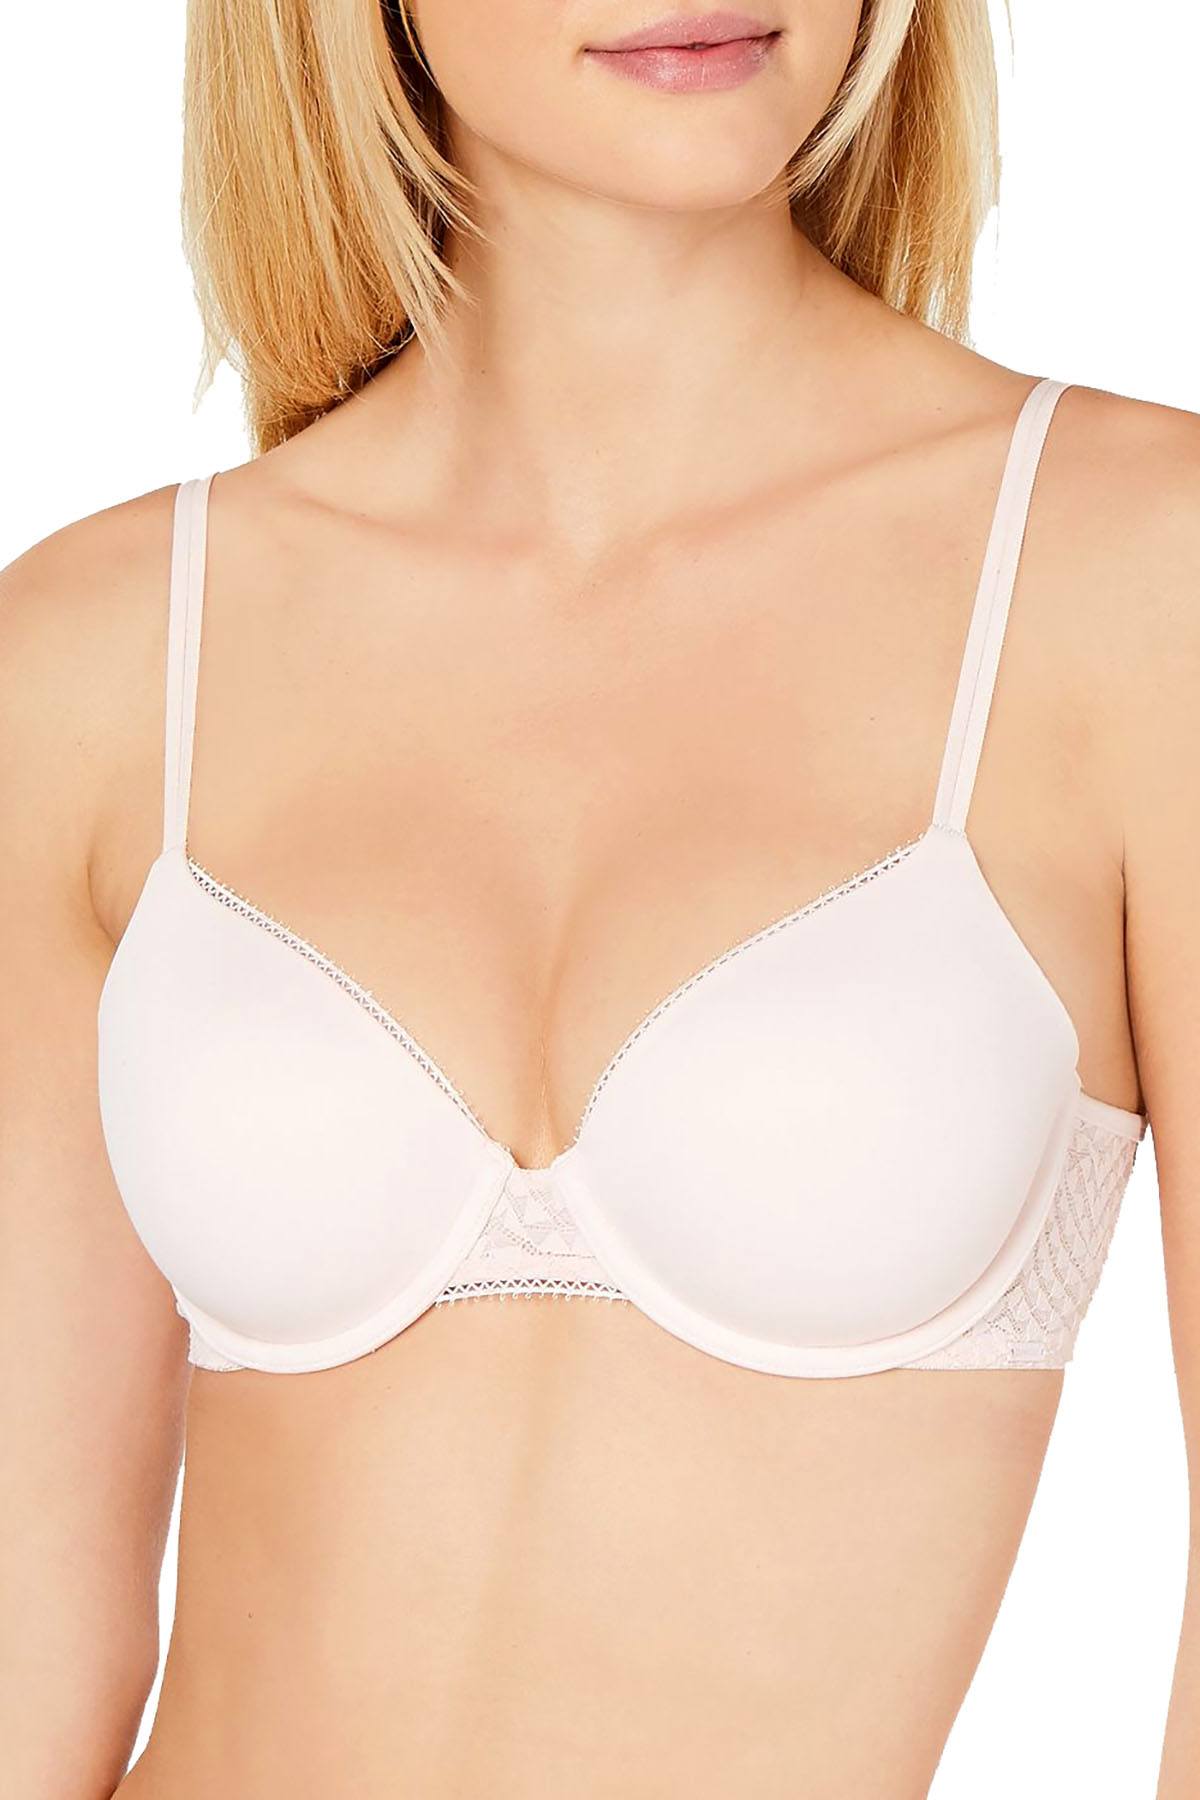 Calvin Klein Perfectly Fit Geometric Lace TShirt Bra in Nymphs Thigh